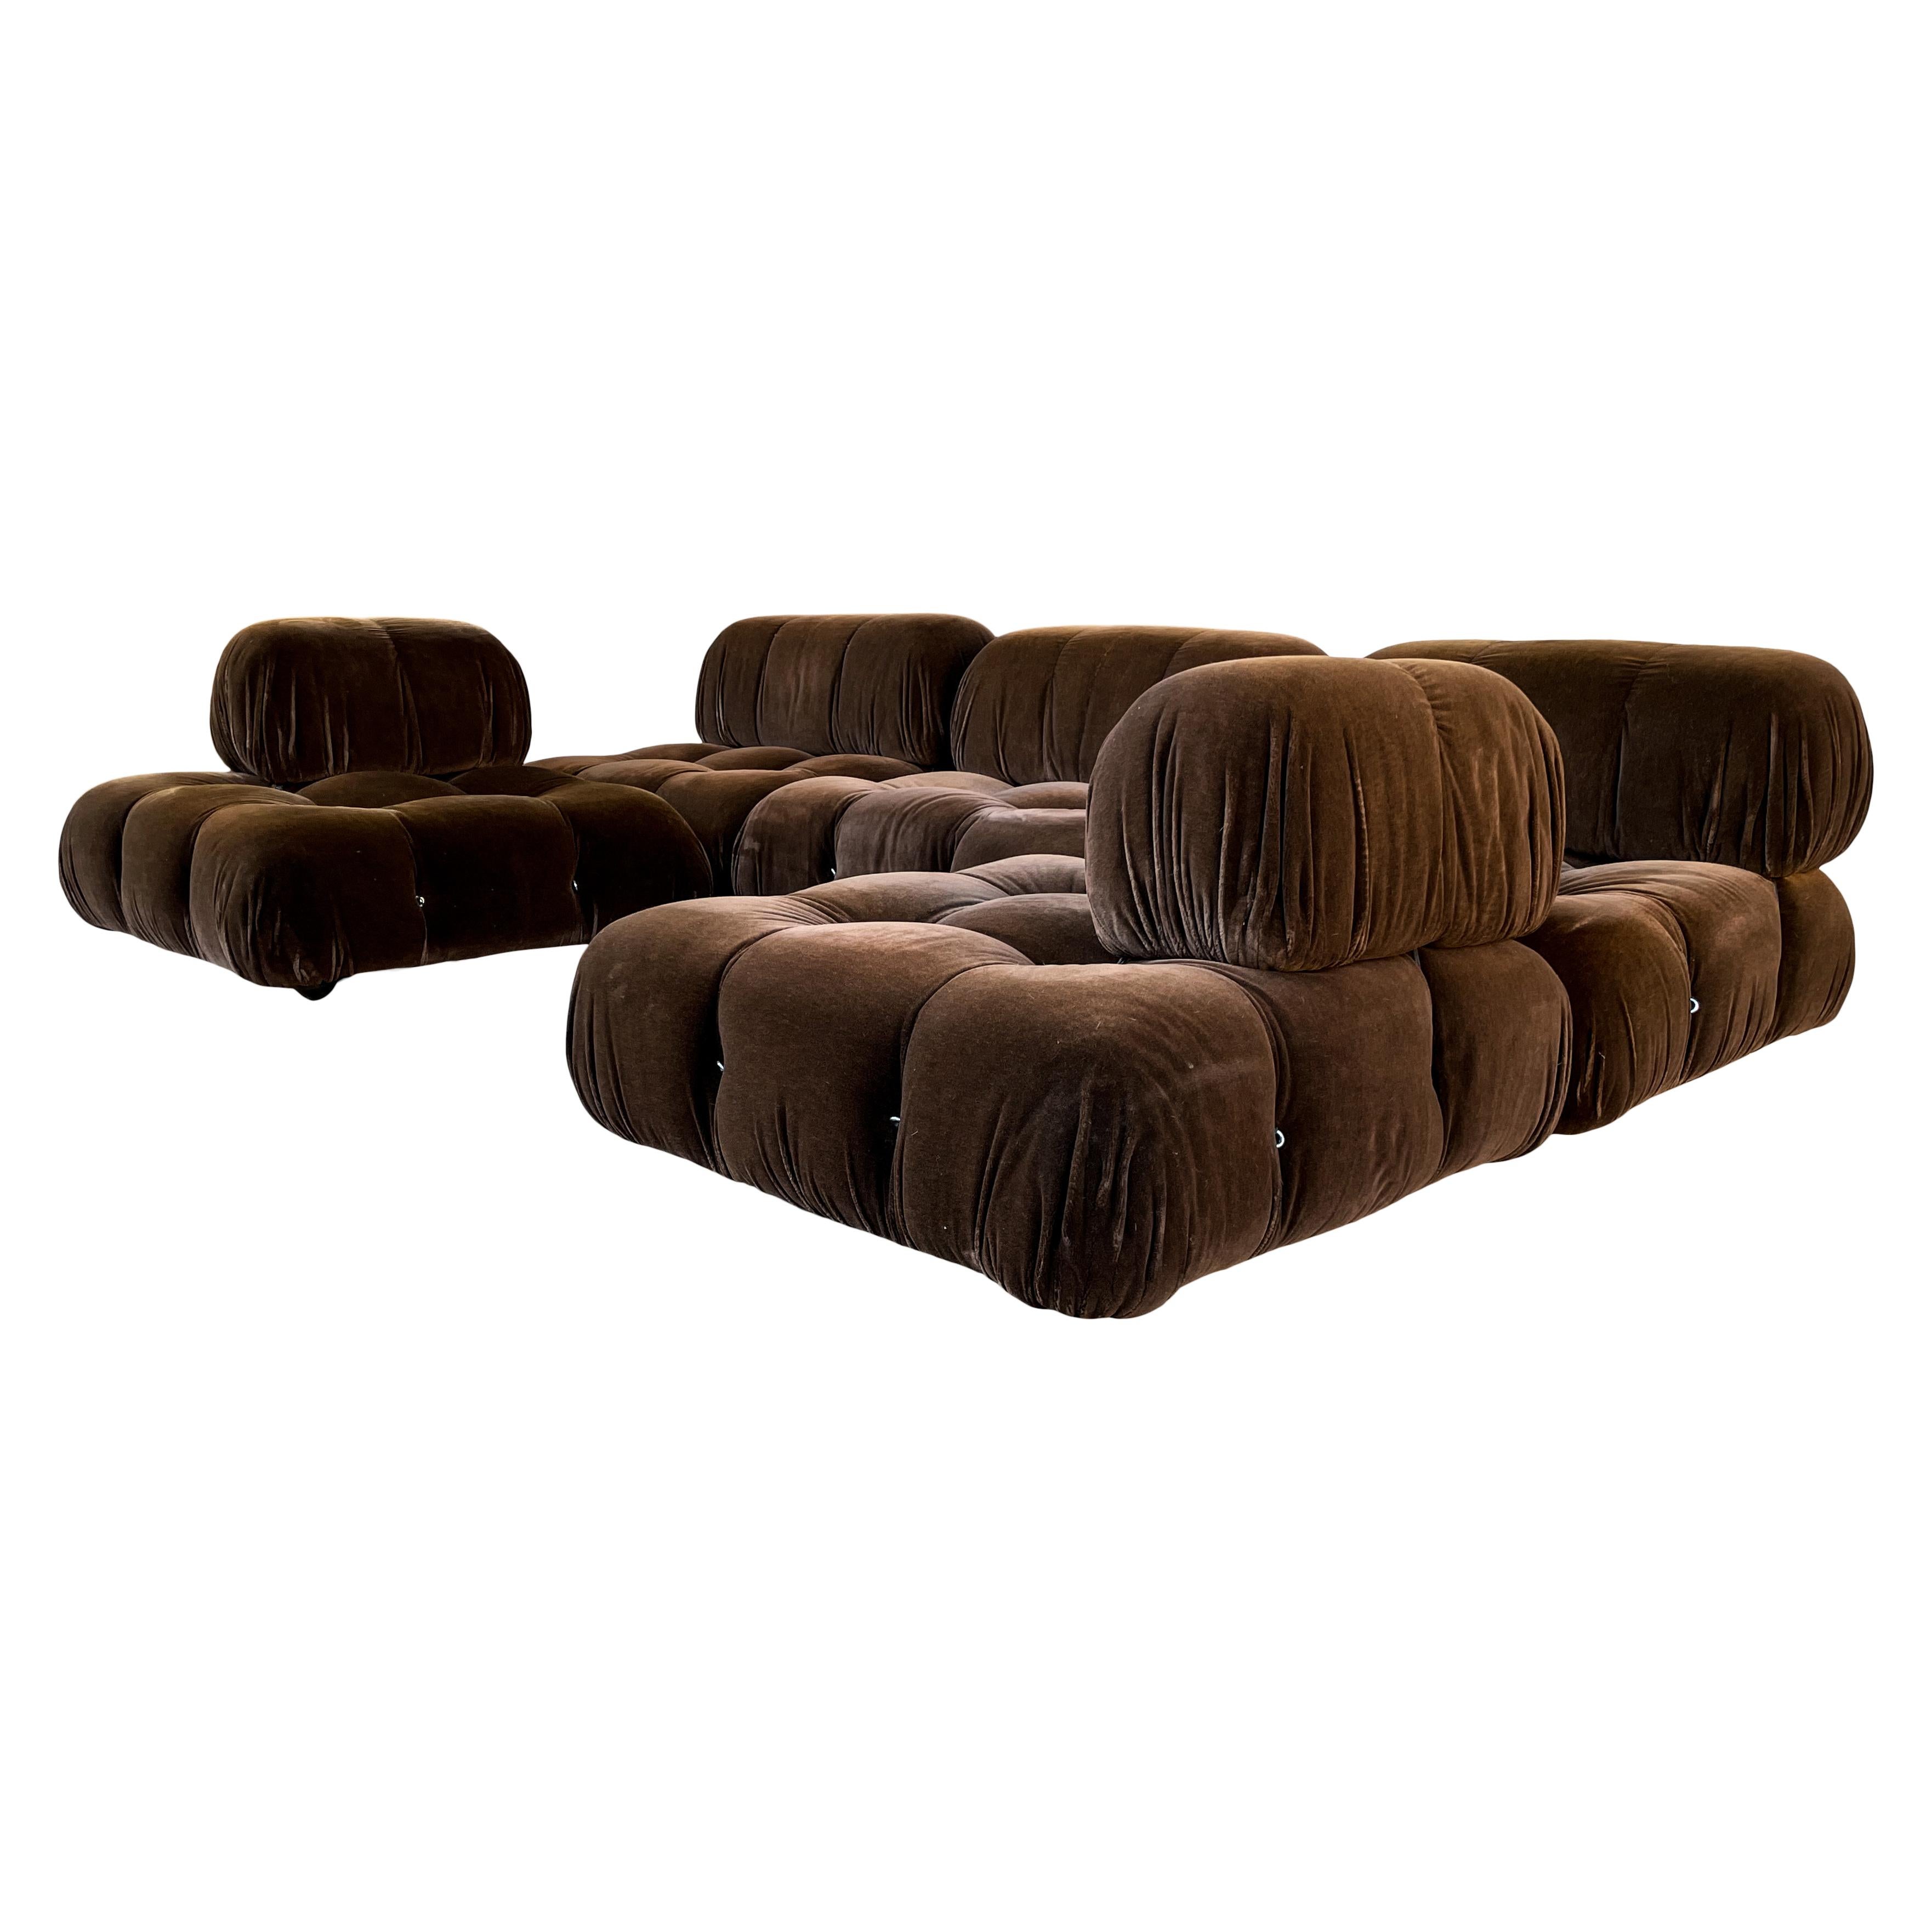 Camaleonda sofa, designed by Mario Bellini and manufactured by B&B Italia in 1972.

The set features three modules with big backrest, and two modules with small backrest.

Alpaca velvet upholstery.

Fully restored in Italy.
 
Mario Bellini